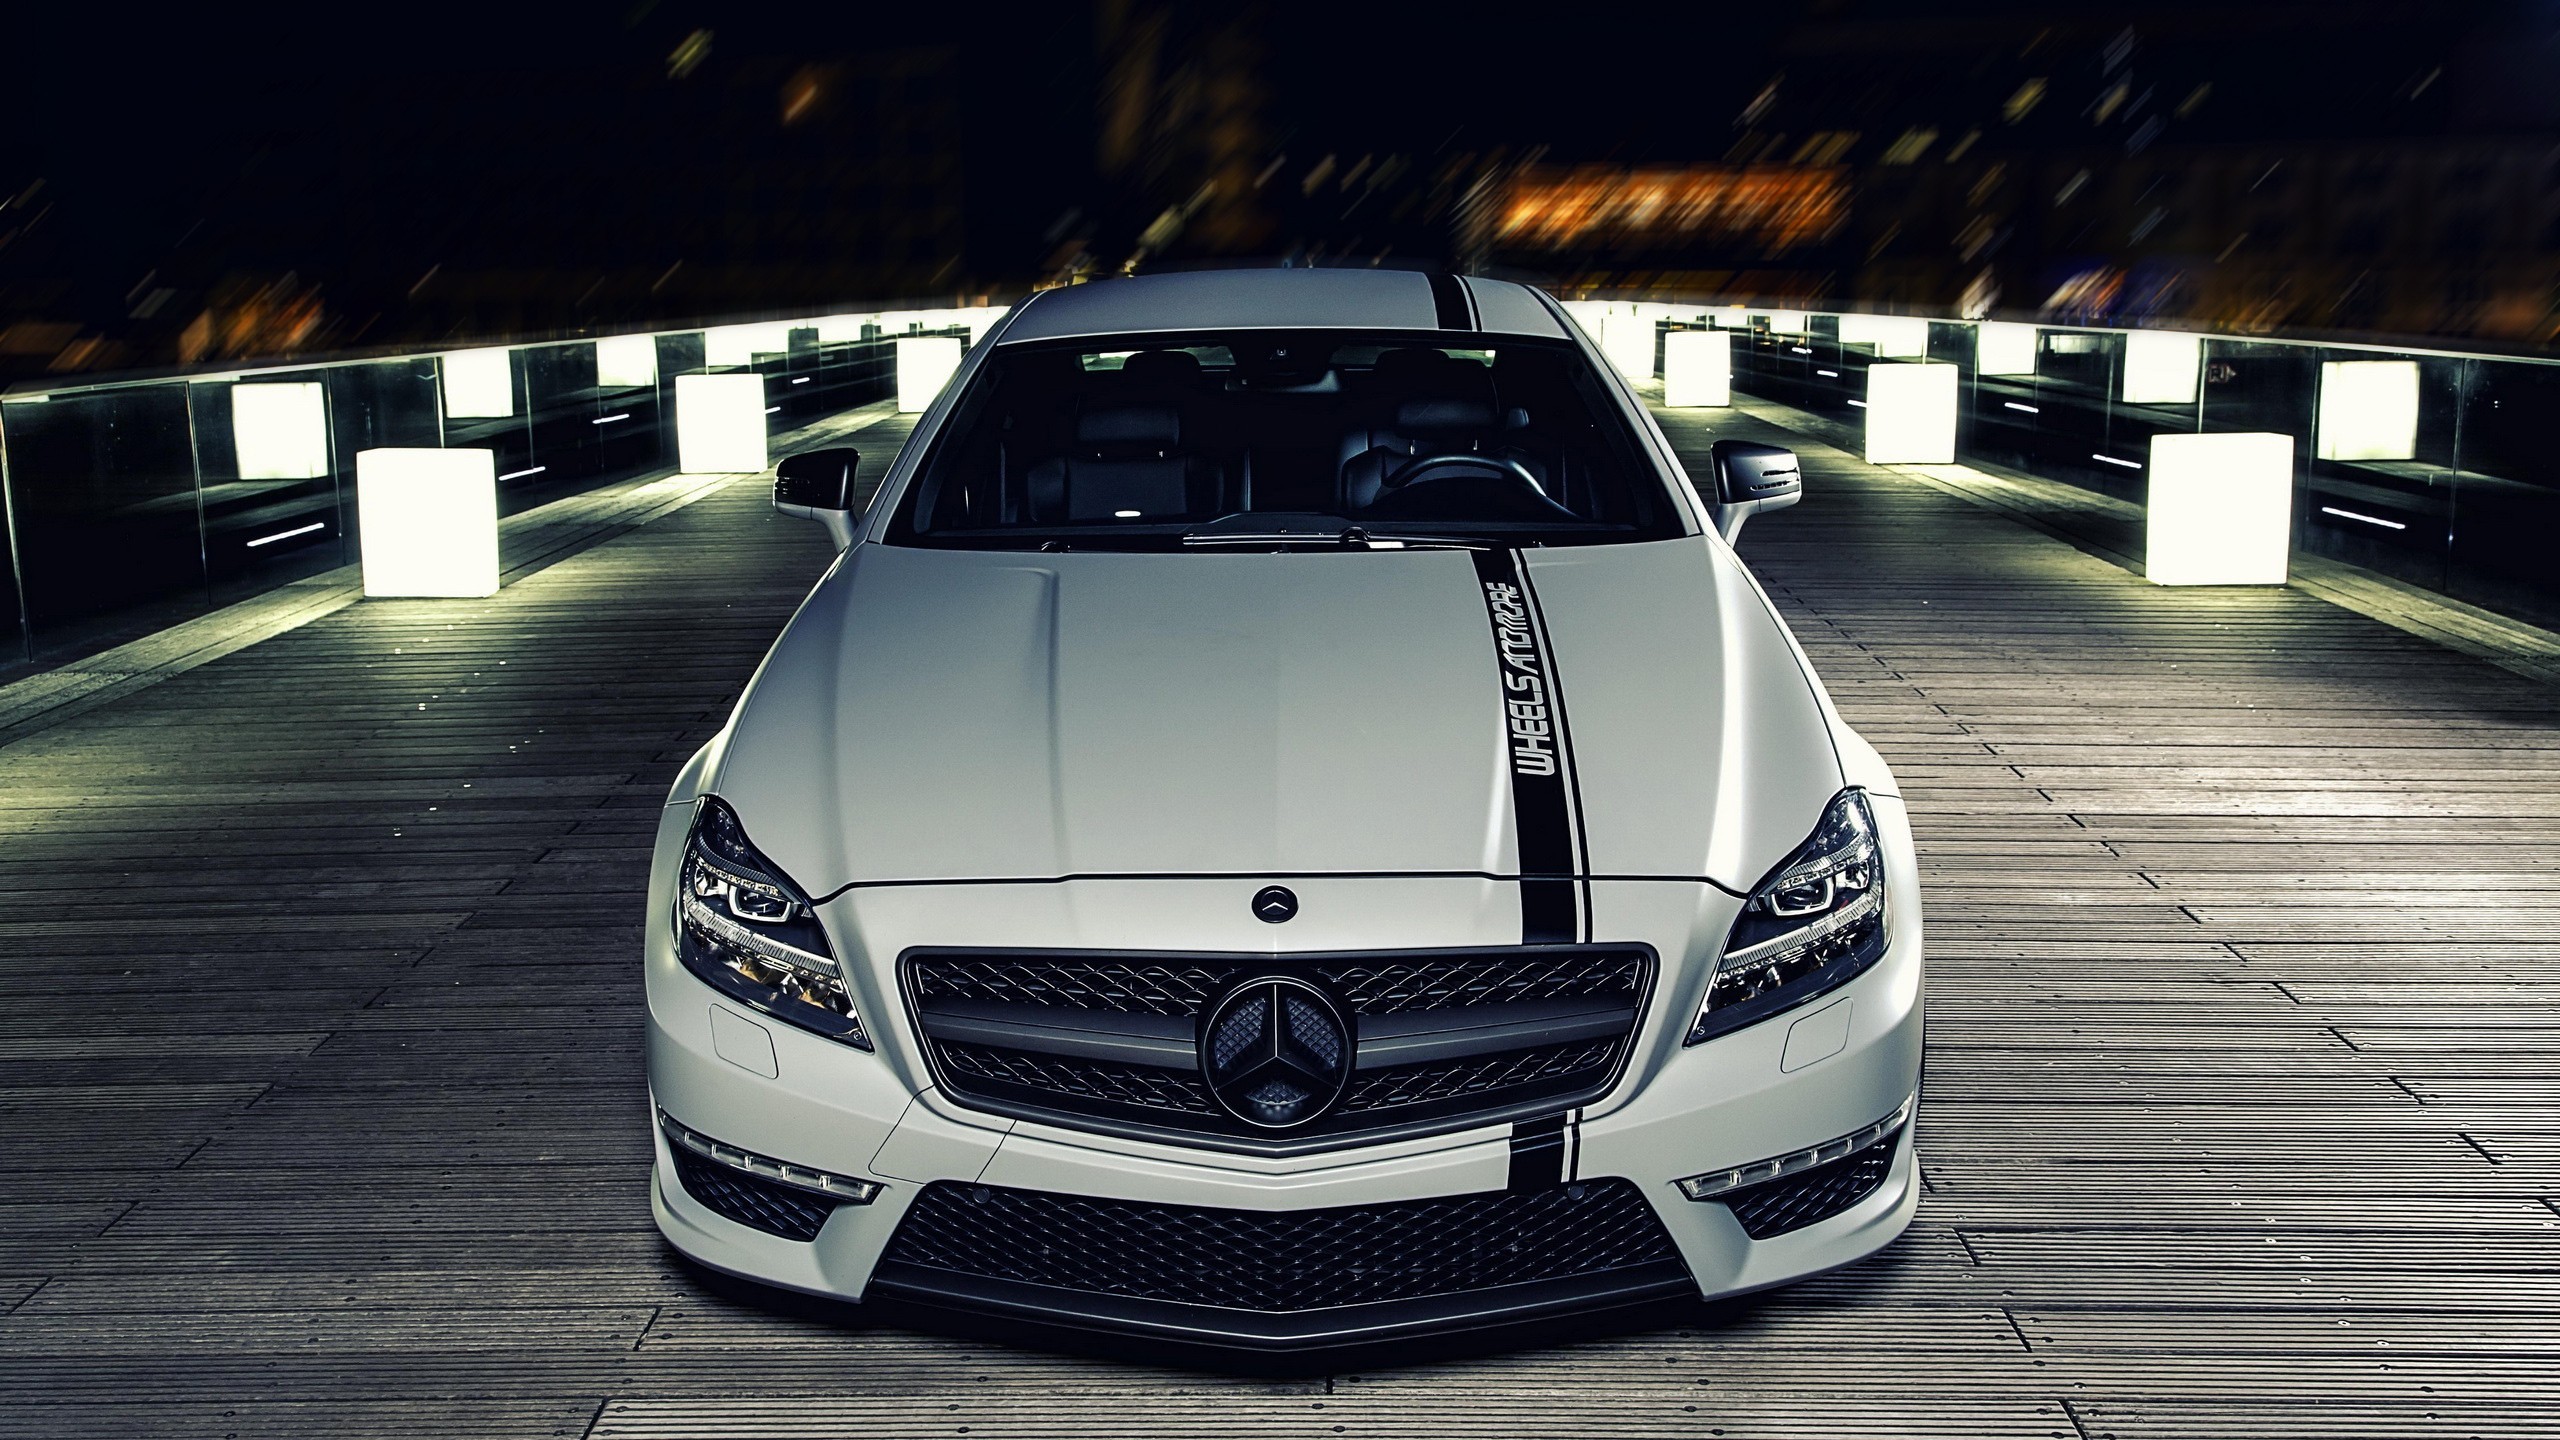 General 2560x1440 Mercedes-Benz car white cars vehicle frontal view